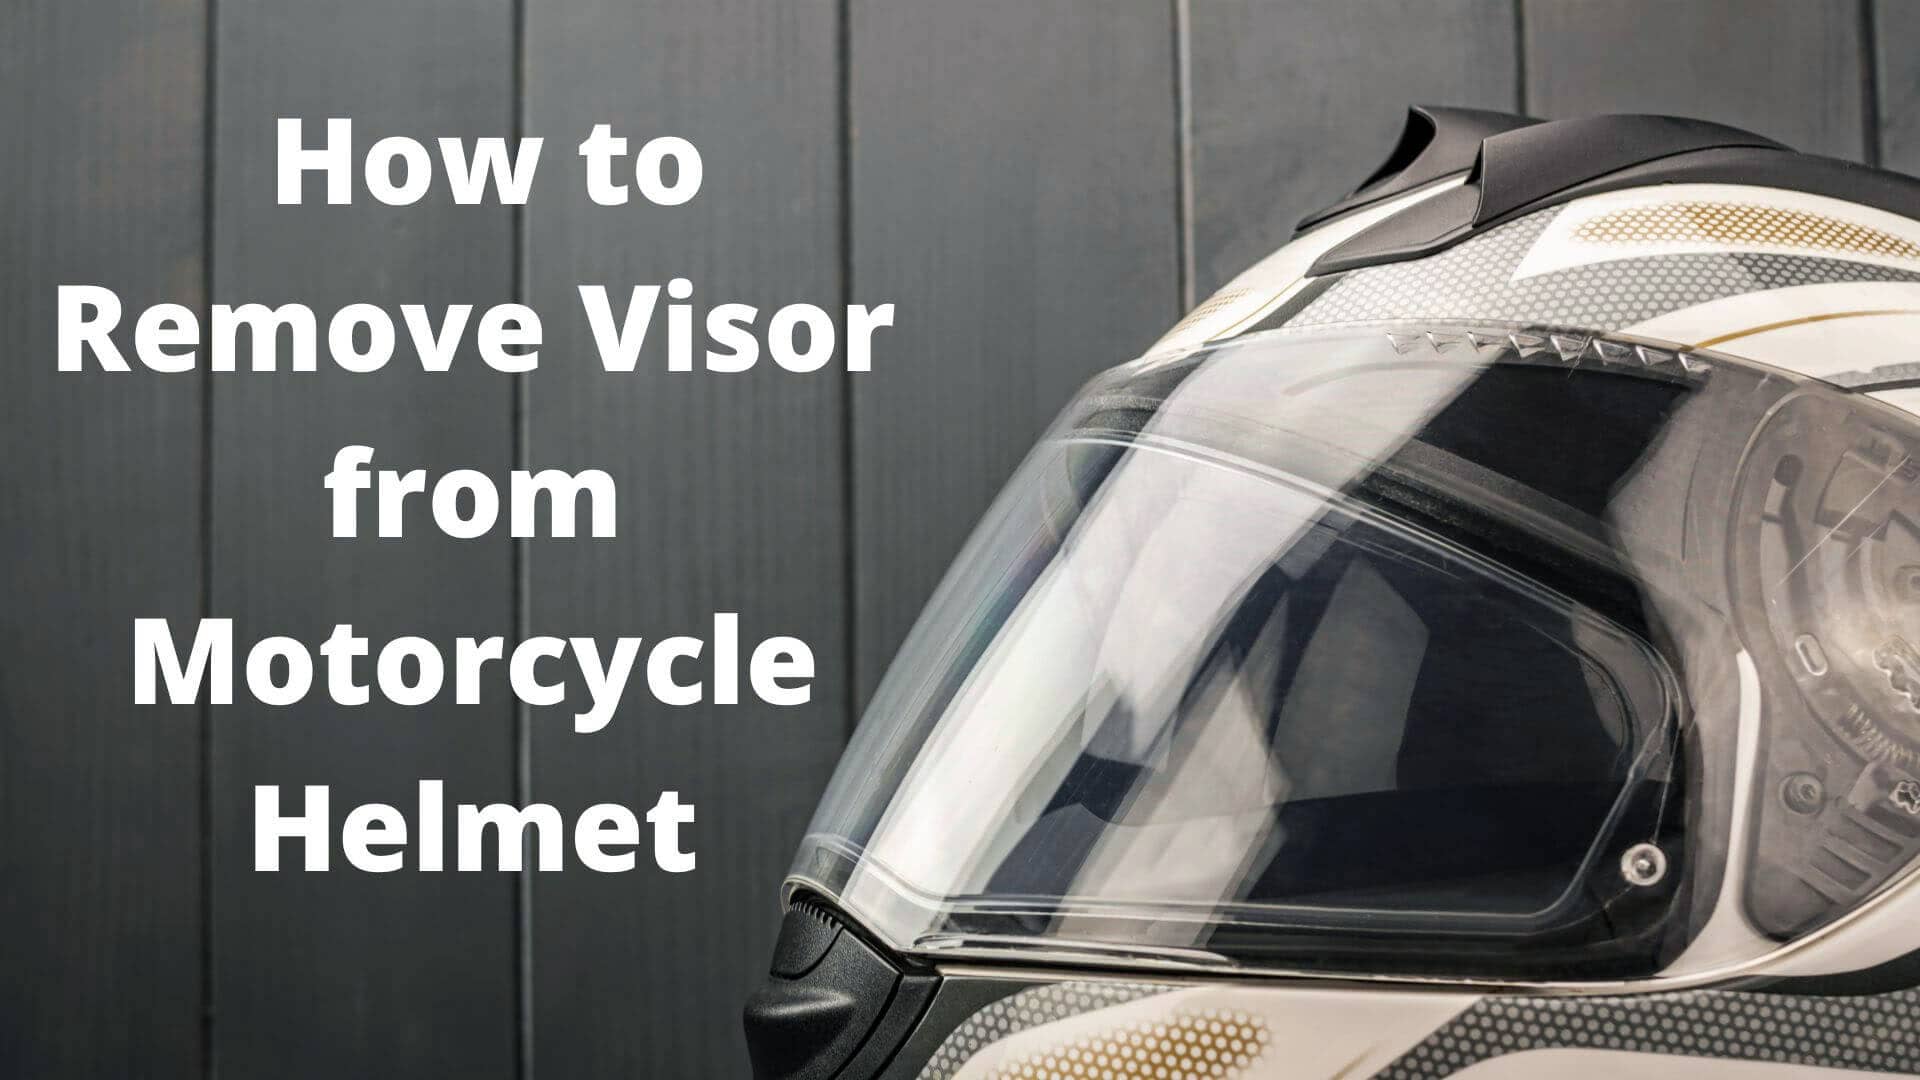 How to Remove Visor from Motorcycle Helmet?